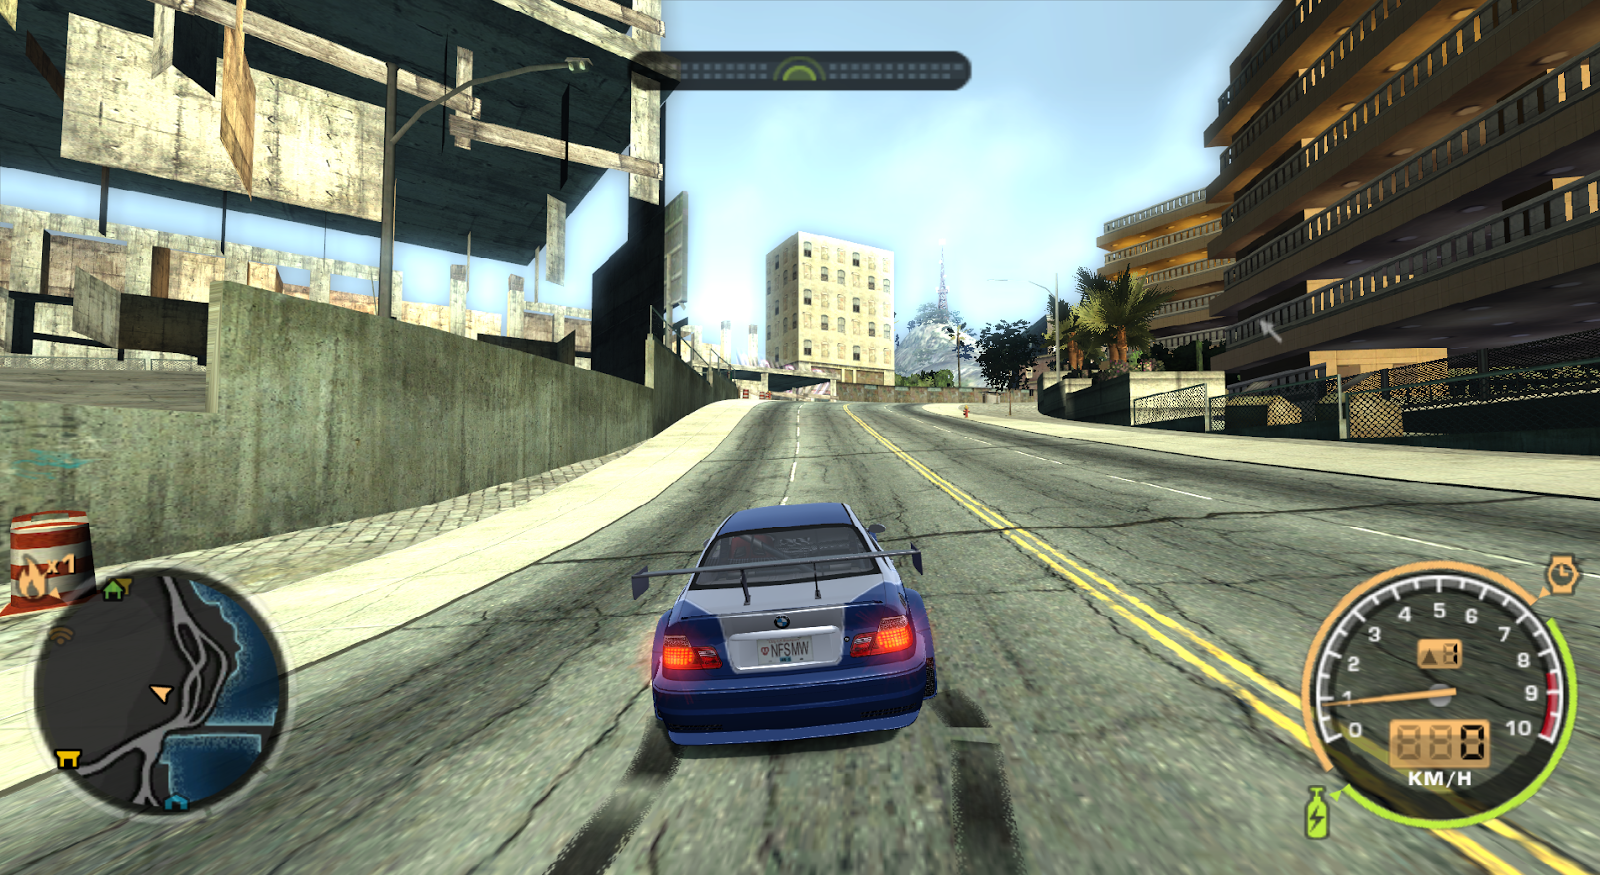 Nfs tools. NFS MW Map 2005. NFS Toolkit most wanted. Rockport NFS MW. Номерной знак NFS most wanted.